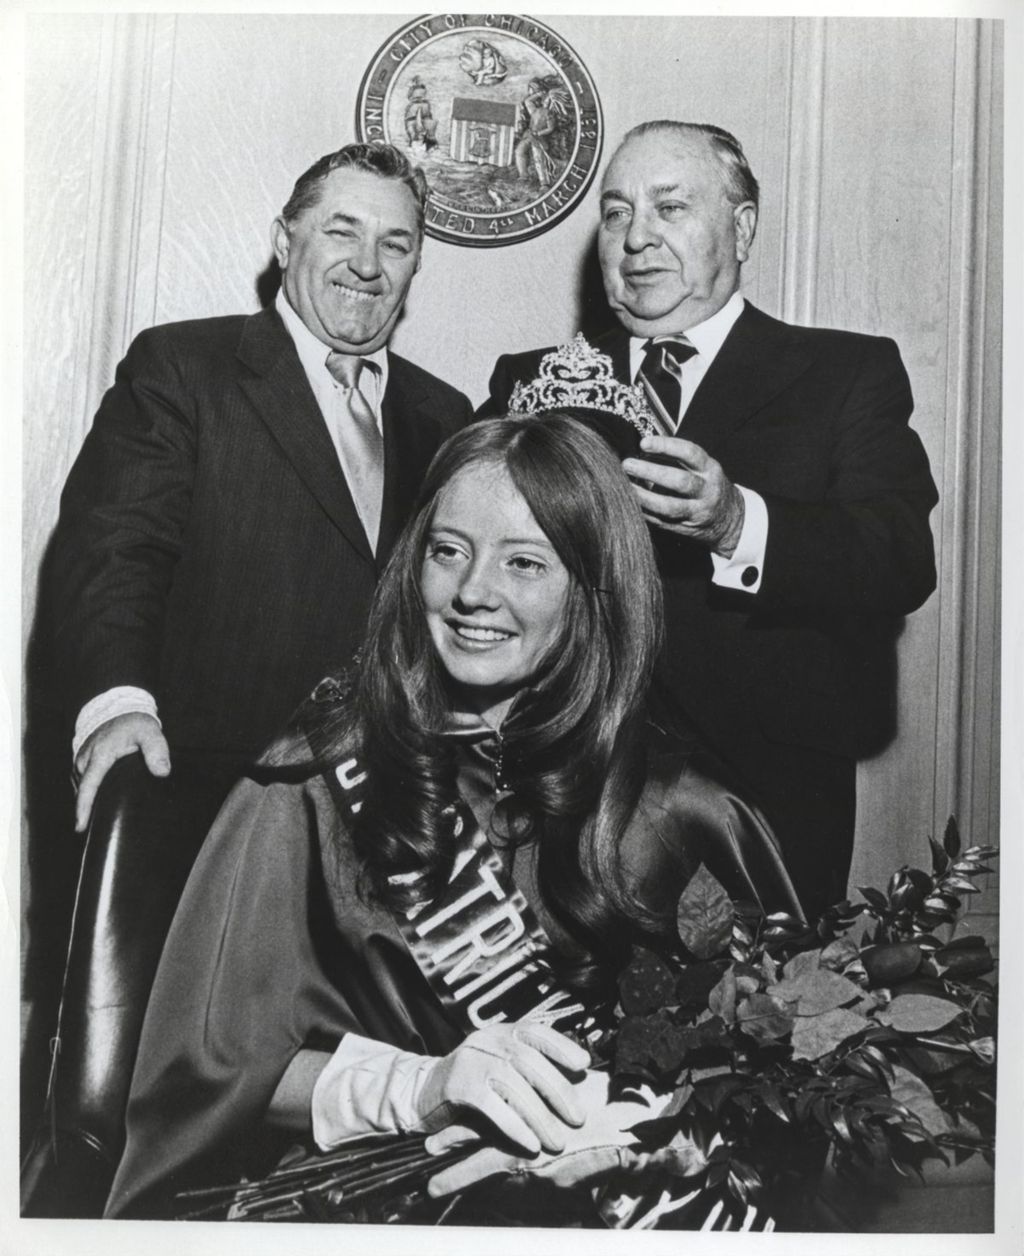 Miniature of Richard J. Daley crowns a St. Patrick's Day Queen